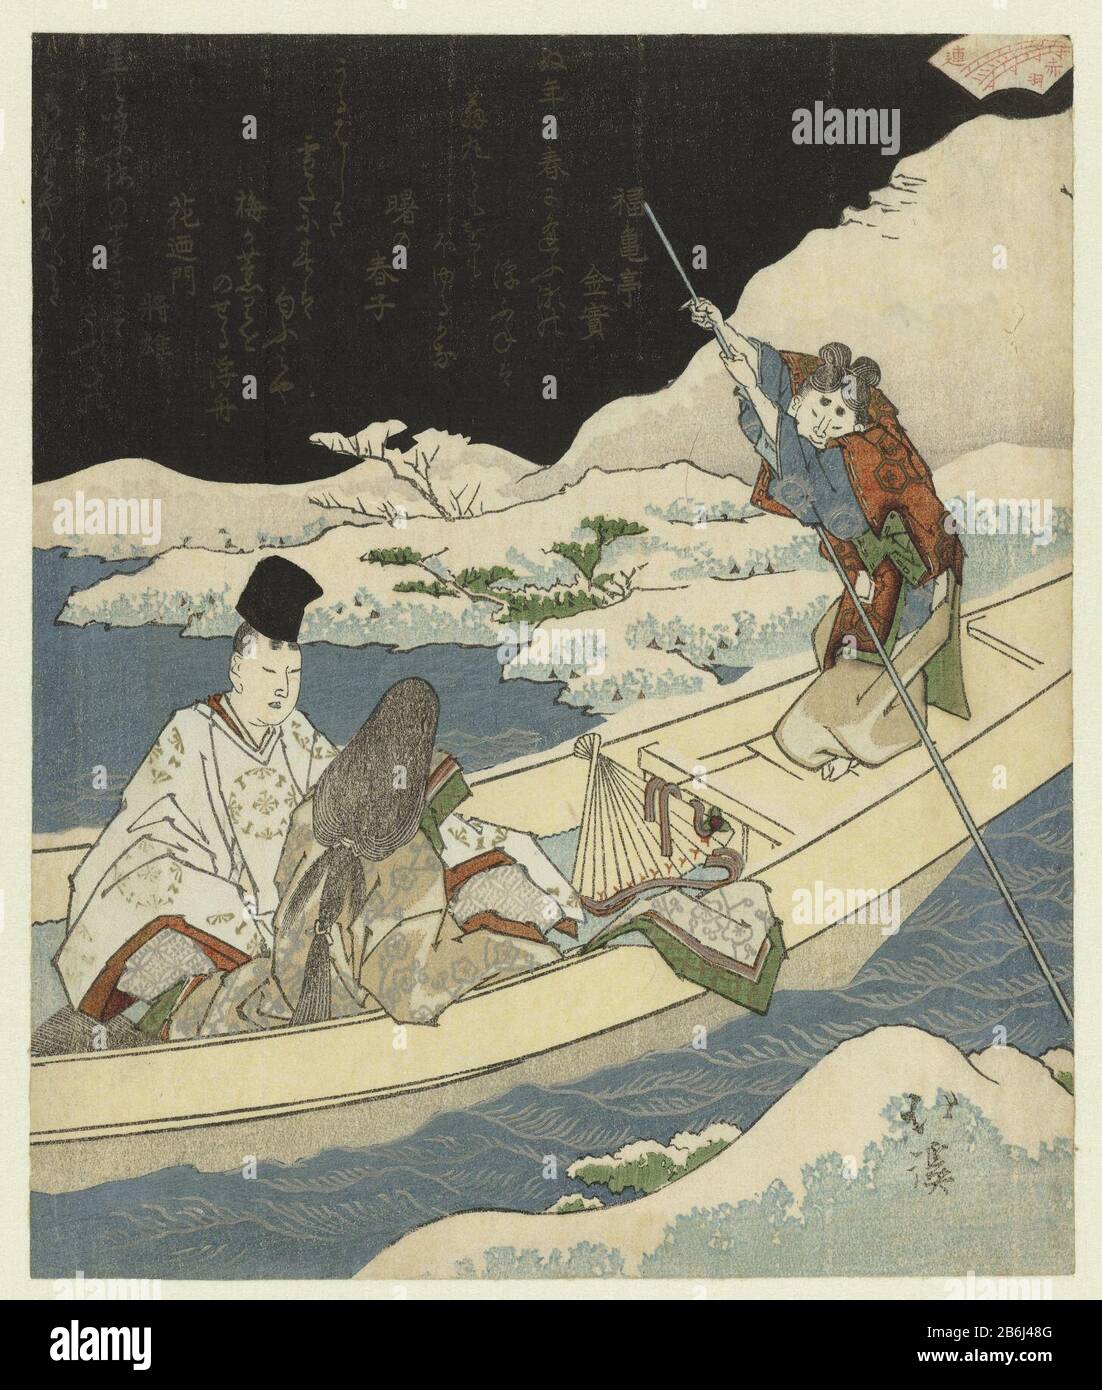 The nighttime speed Hofdame and nobleman on an overnight sailing through a snowy landscape. This scene refers to Chapter 51 'Ukifune' from The Tale of Genji. In this episode, the grandson of Genji, Prince Niou there on a night with the lady Ukifune off. The Tale of Genji (Genji Monogatari) is written in the Heian period (794-1185) by the maid of honor Murasaki Shikibu. With three gedichten. Manufacturer : printmaker: Totoya Hokkei (listed building) poet Fukukitei Kanezane (listed building) poet: Akebono no Haruko (listed building) poet Hananomon Masao (listed property) Place manufacture: Japan Stock Photo